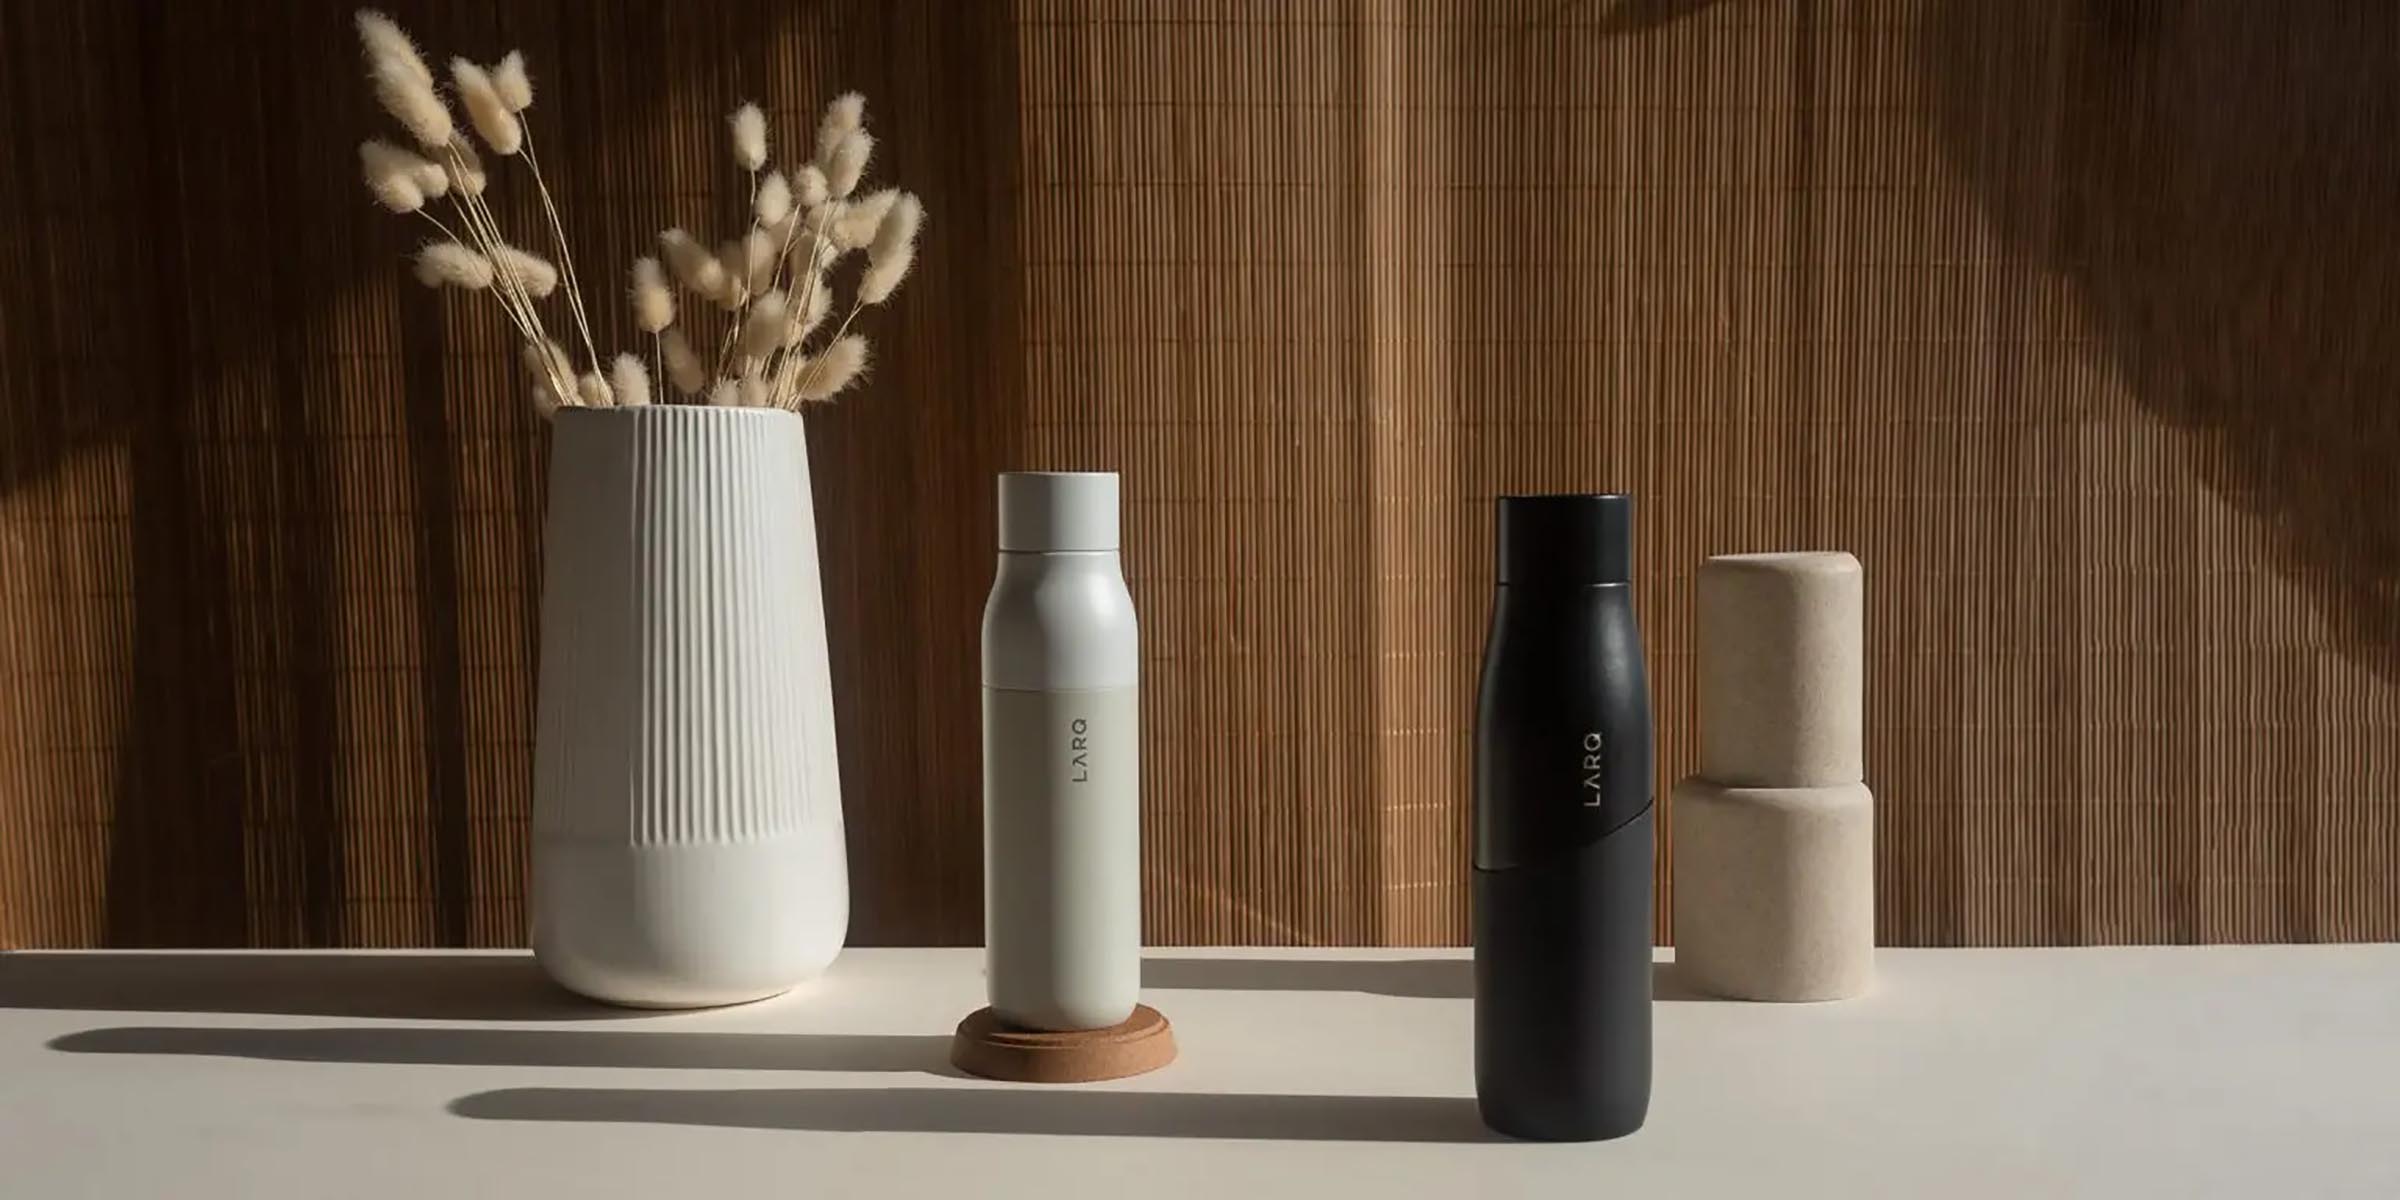 This bottle sterilizes and purifies your water - and keeps it cold all day  long